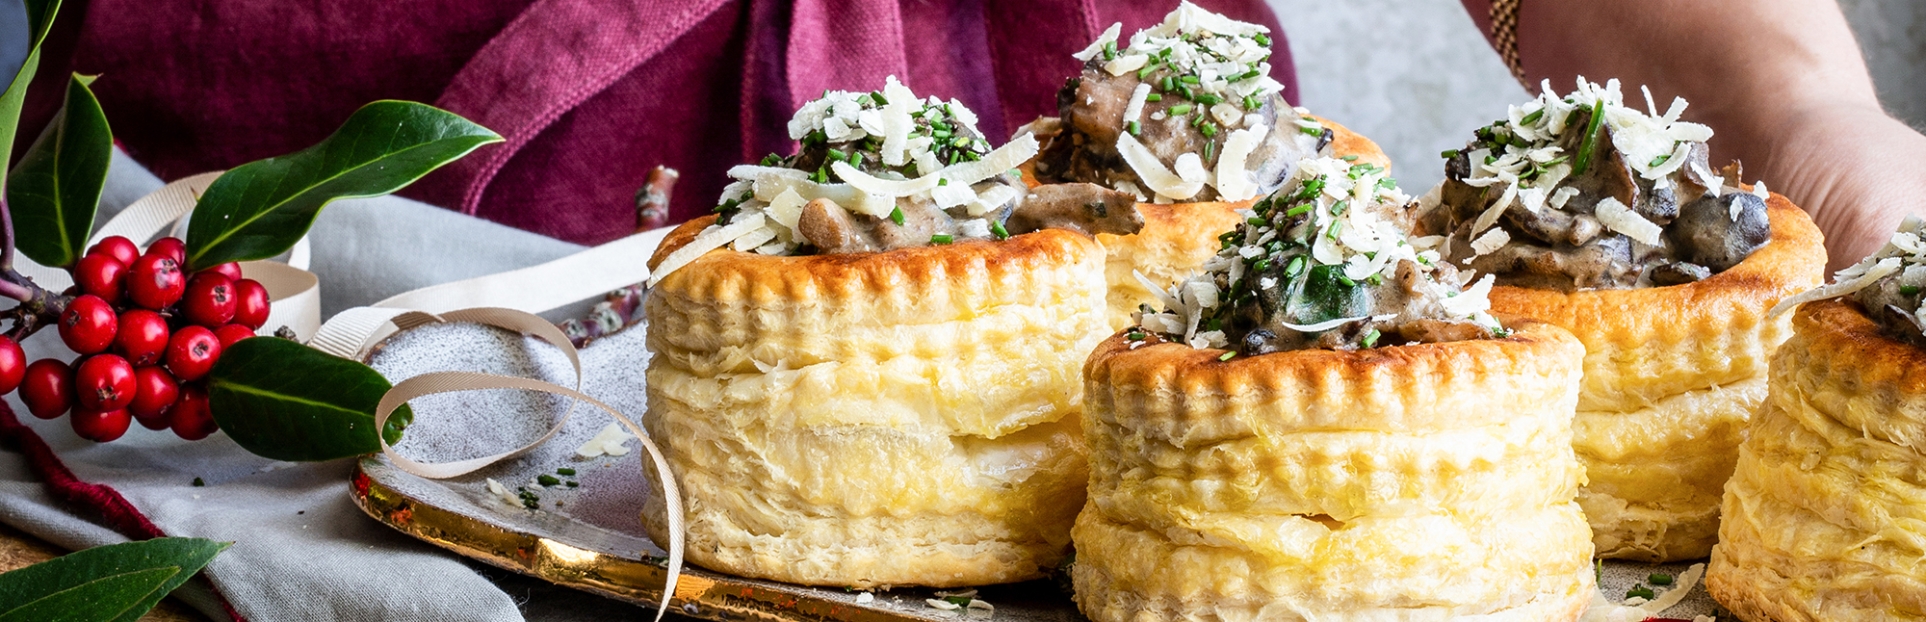 an image of vol au vents with avonmore double cream